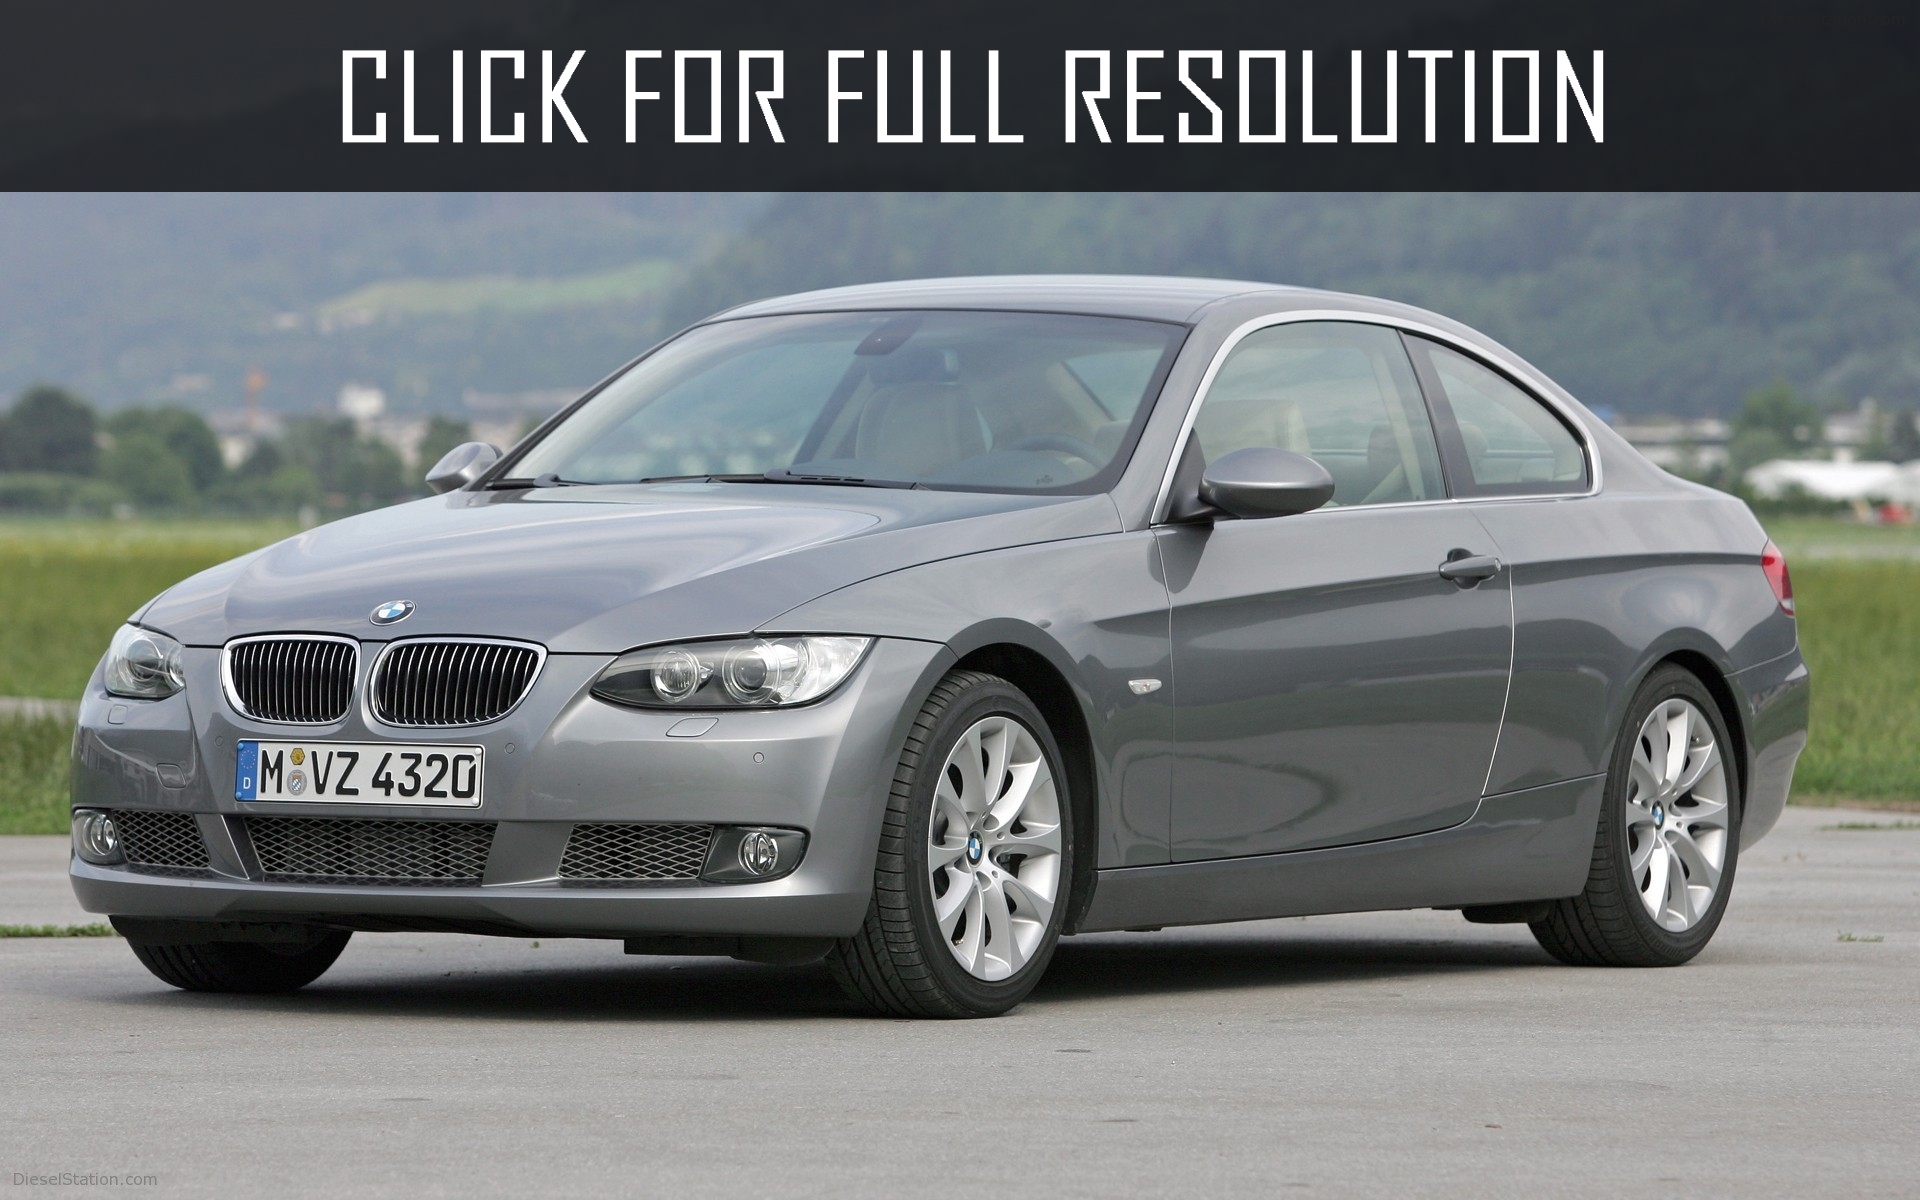 2008 Bmw 3 Series Coupe news, reviews, msrp, ratings